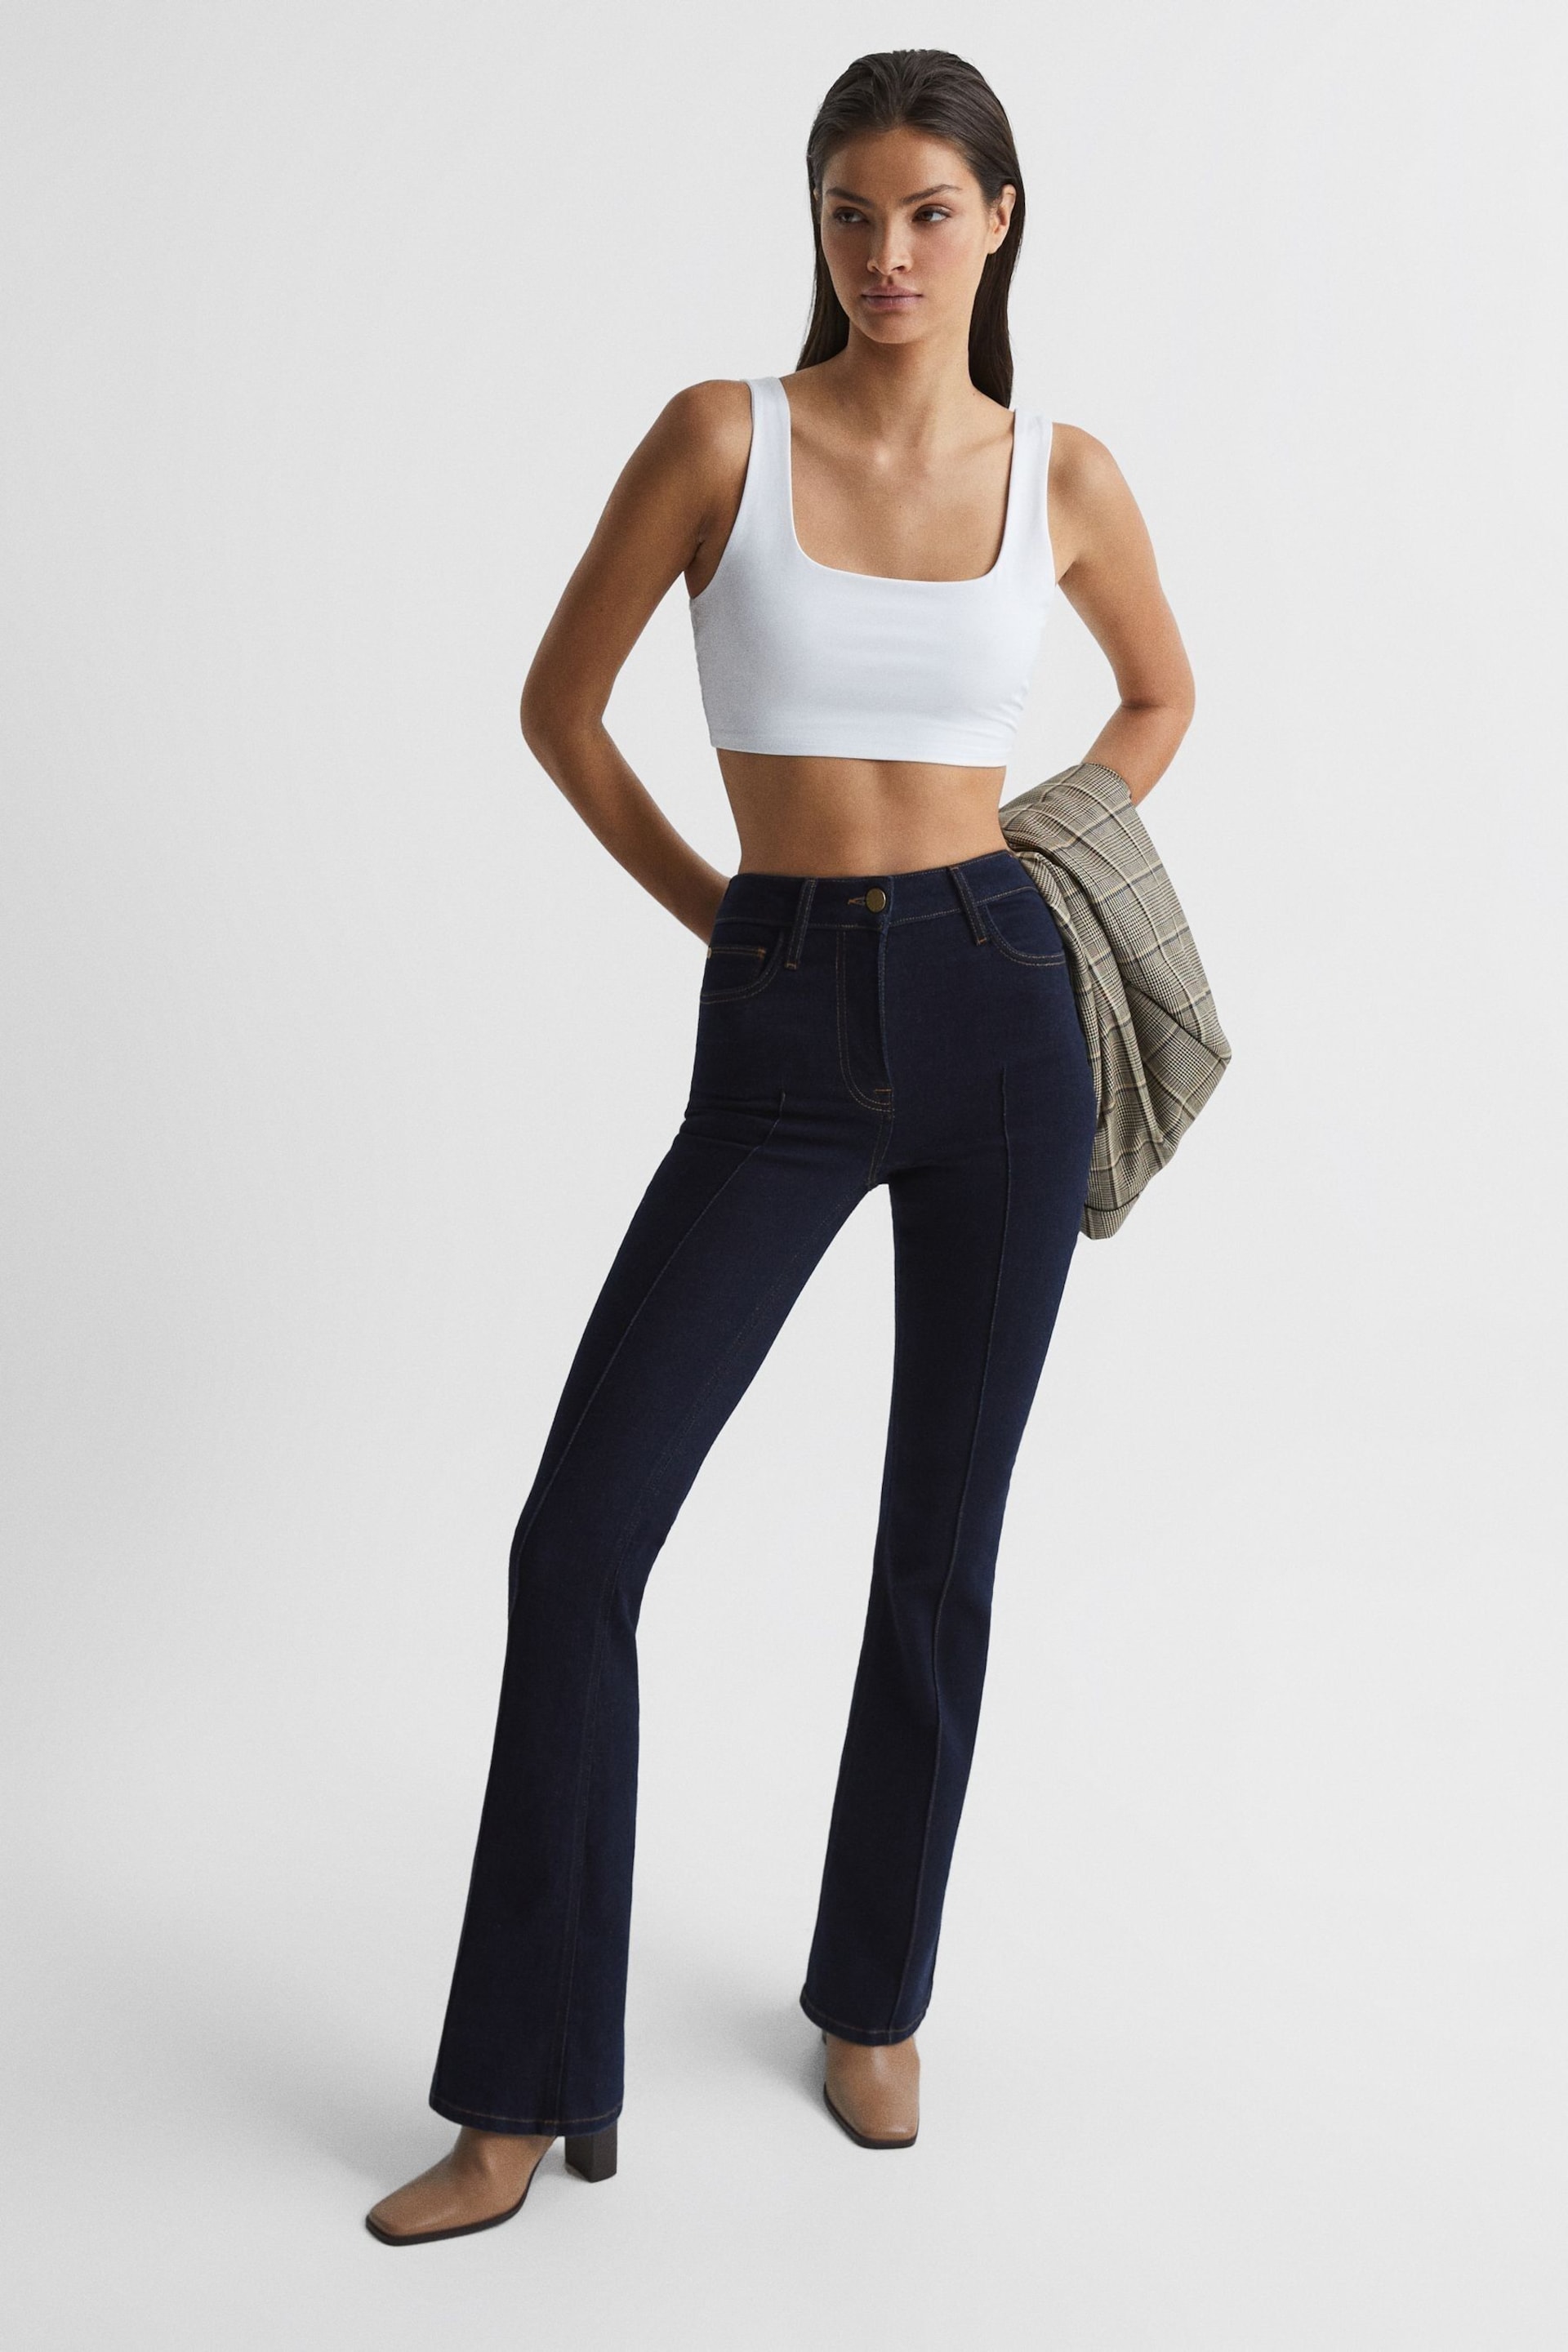 Reiss White Fae Square Neck Crop Top - Image 6 of 7